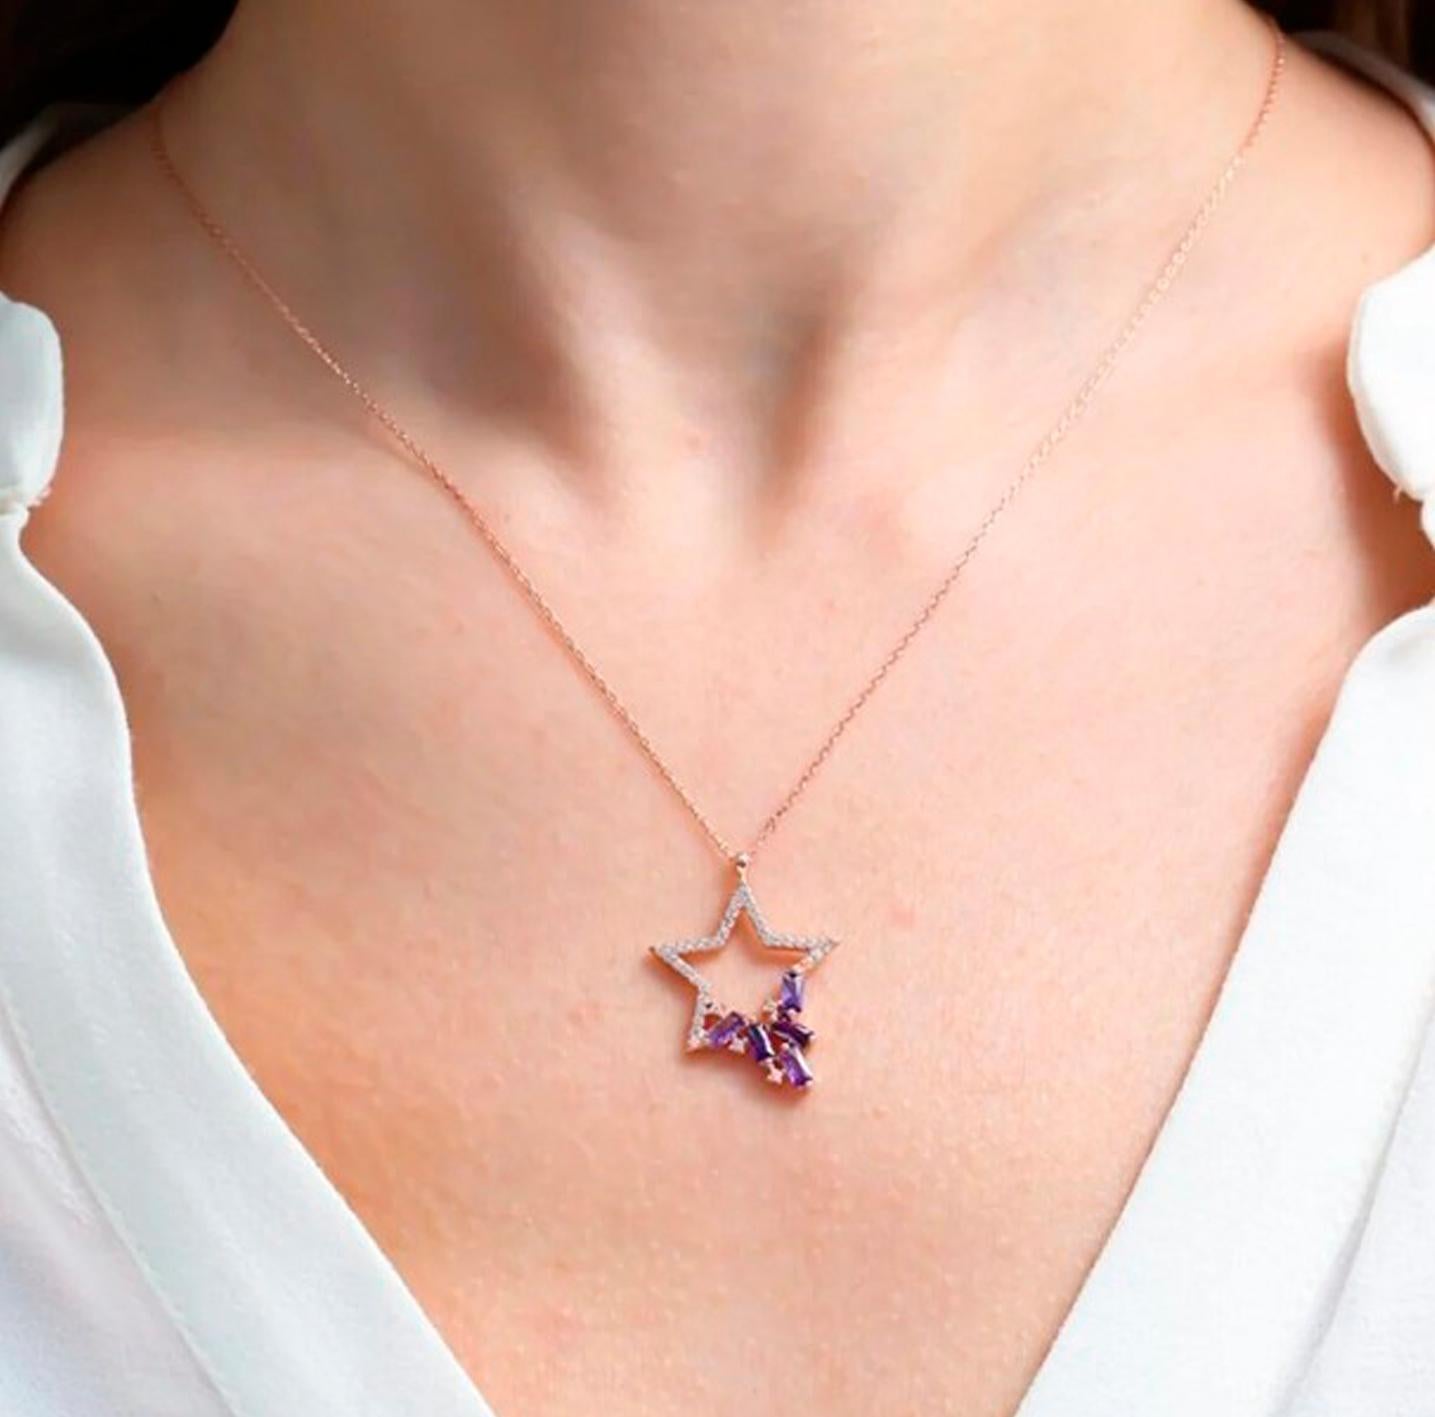 Women's Star pendant necklace with diamonds and amethysts in 14k gold. 